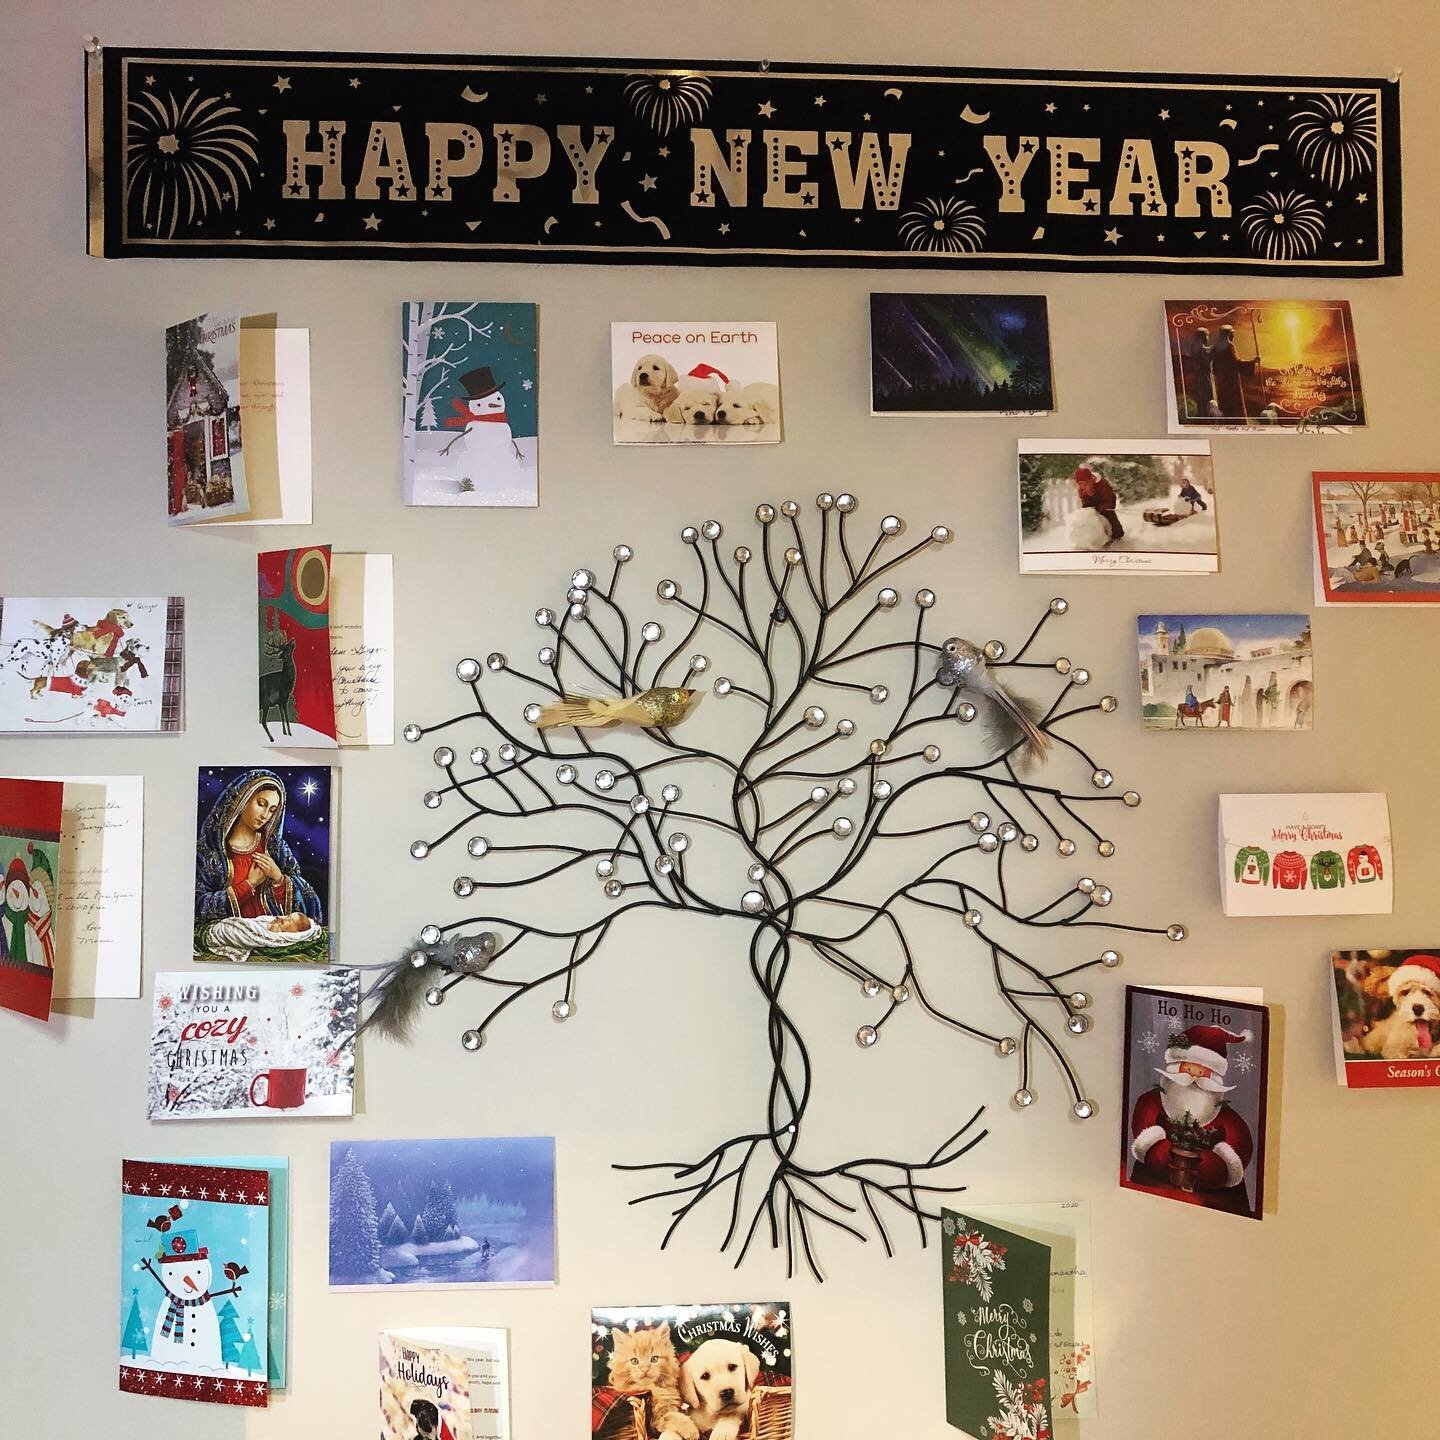 Though we were apart this holiday season, love and best wishes arrived in the mail. There is a lot of love around this tree of life 🌿

A New Year brings excitement, joy, and sometimes fear of the unknown. Embrace all your feelings and step into 2021